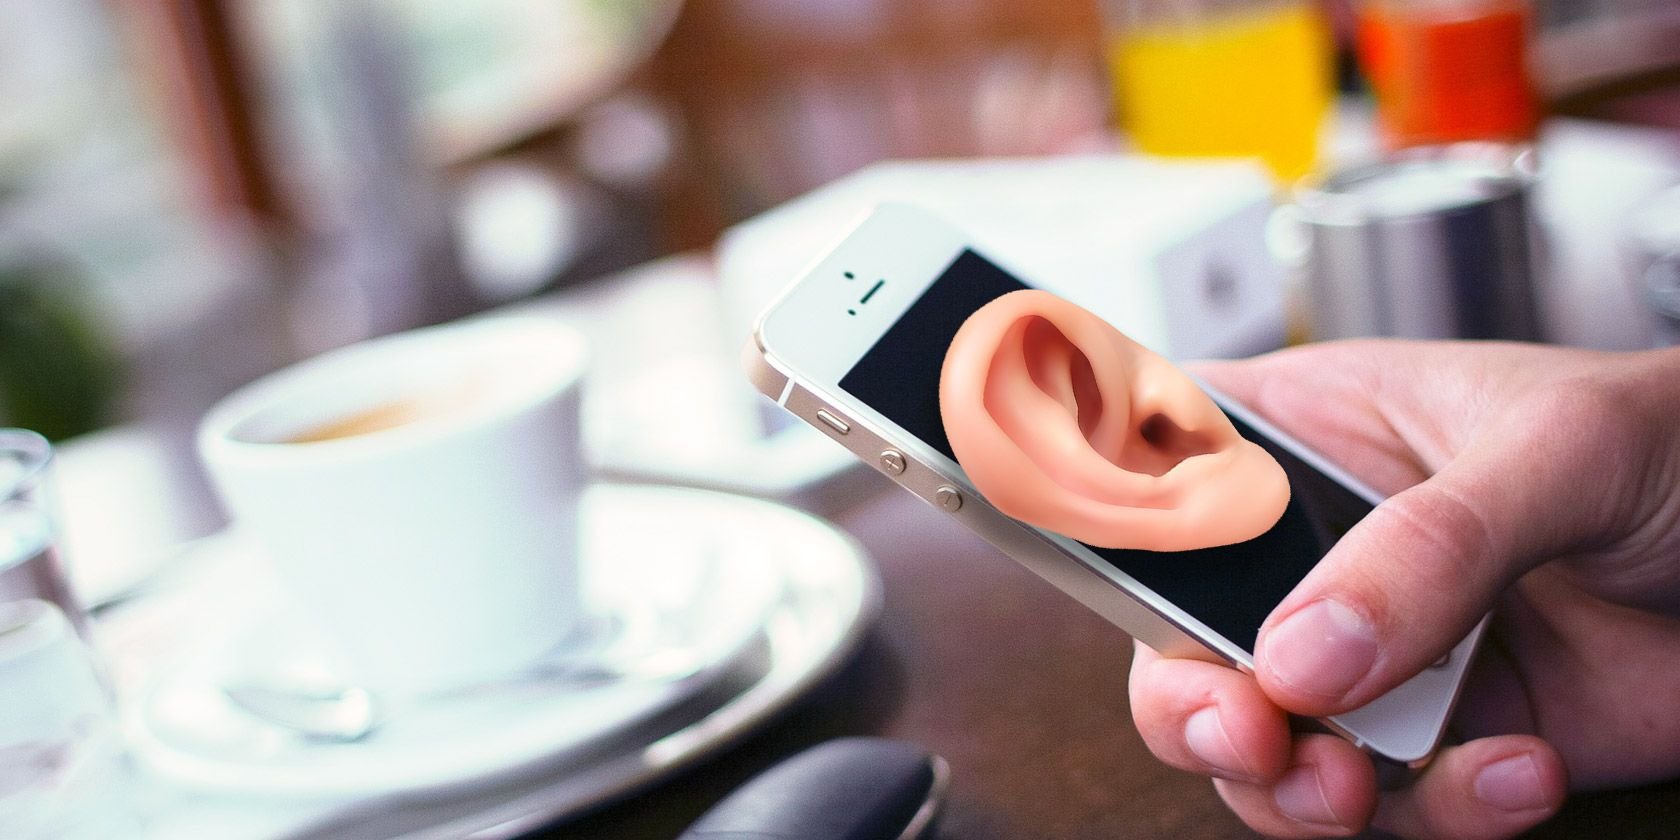 Does Your Phone Listen to You for Ads? Or Is It Just Coincidence?